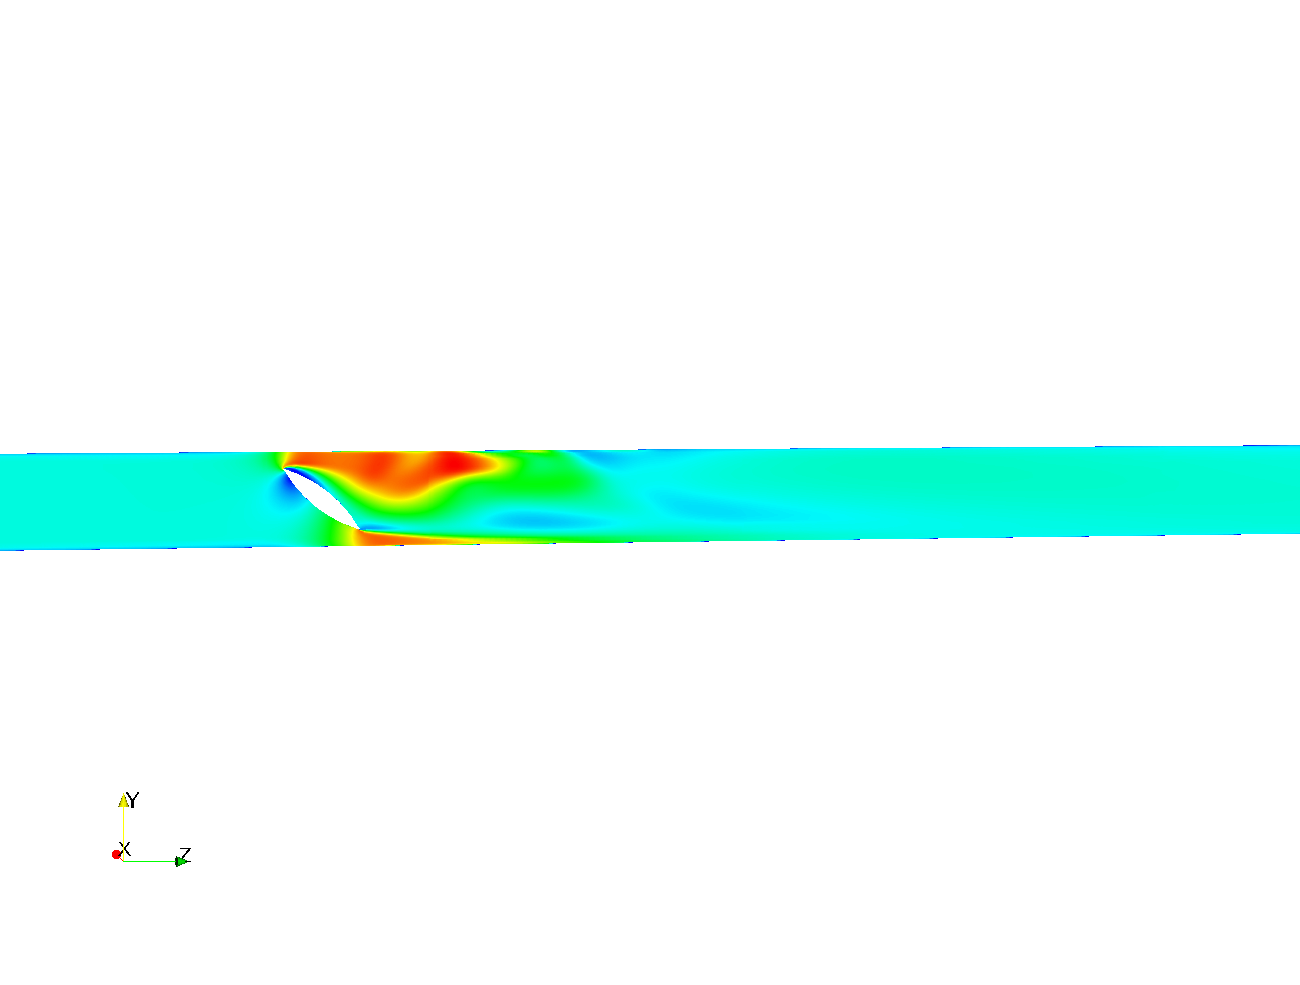 Butterfly Valve Flow Simulation – CFD image